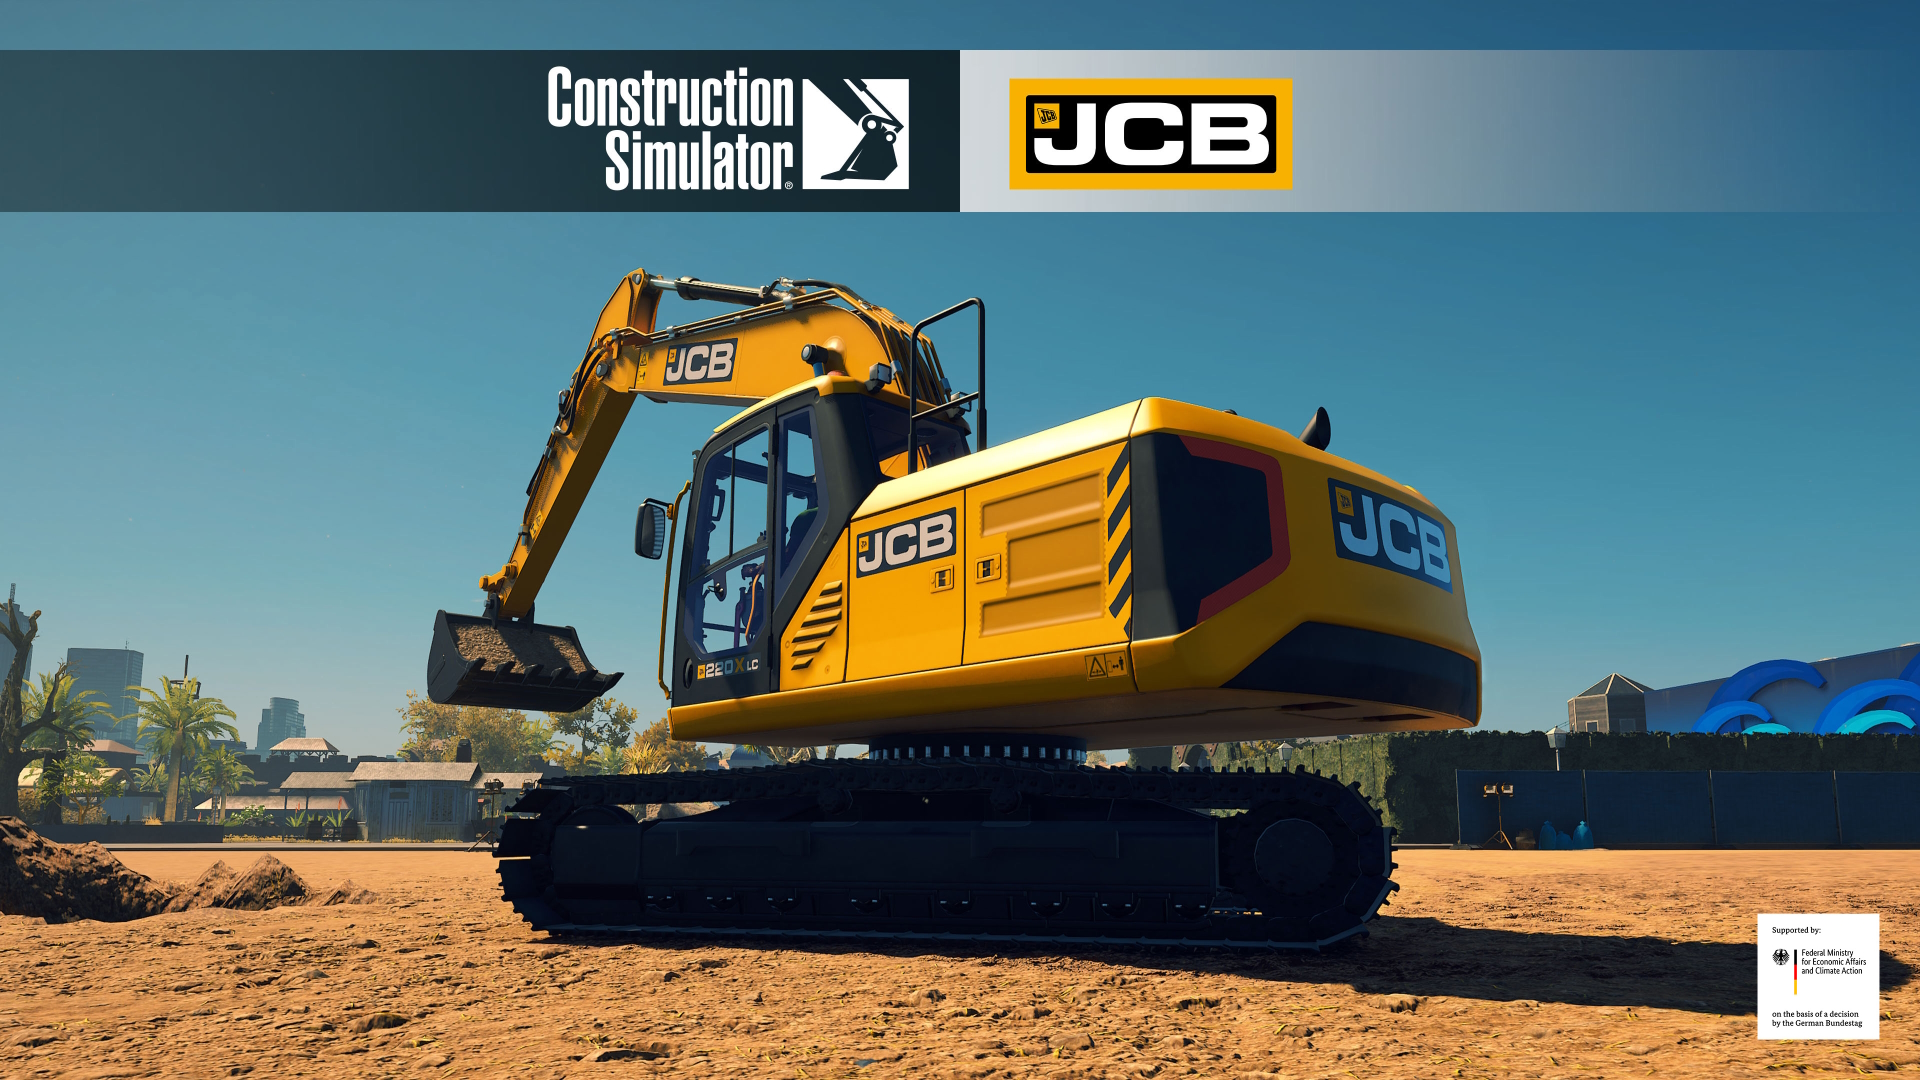 Construction Simulator - JCB Pack brings 6 new vehicles of the